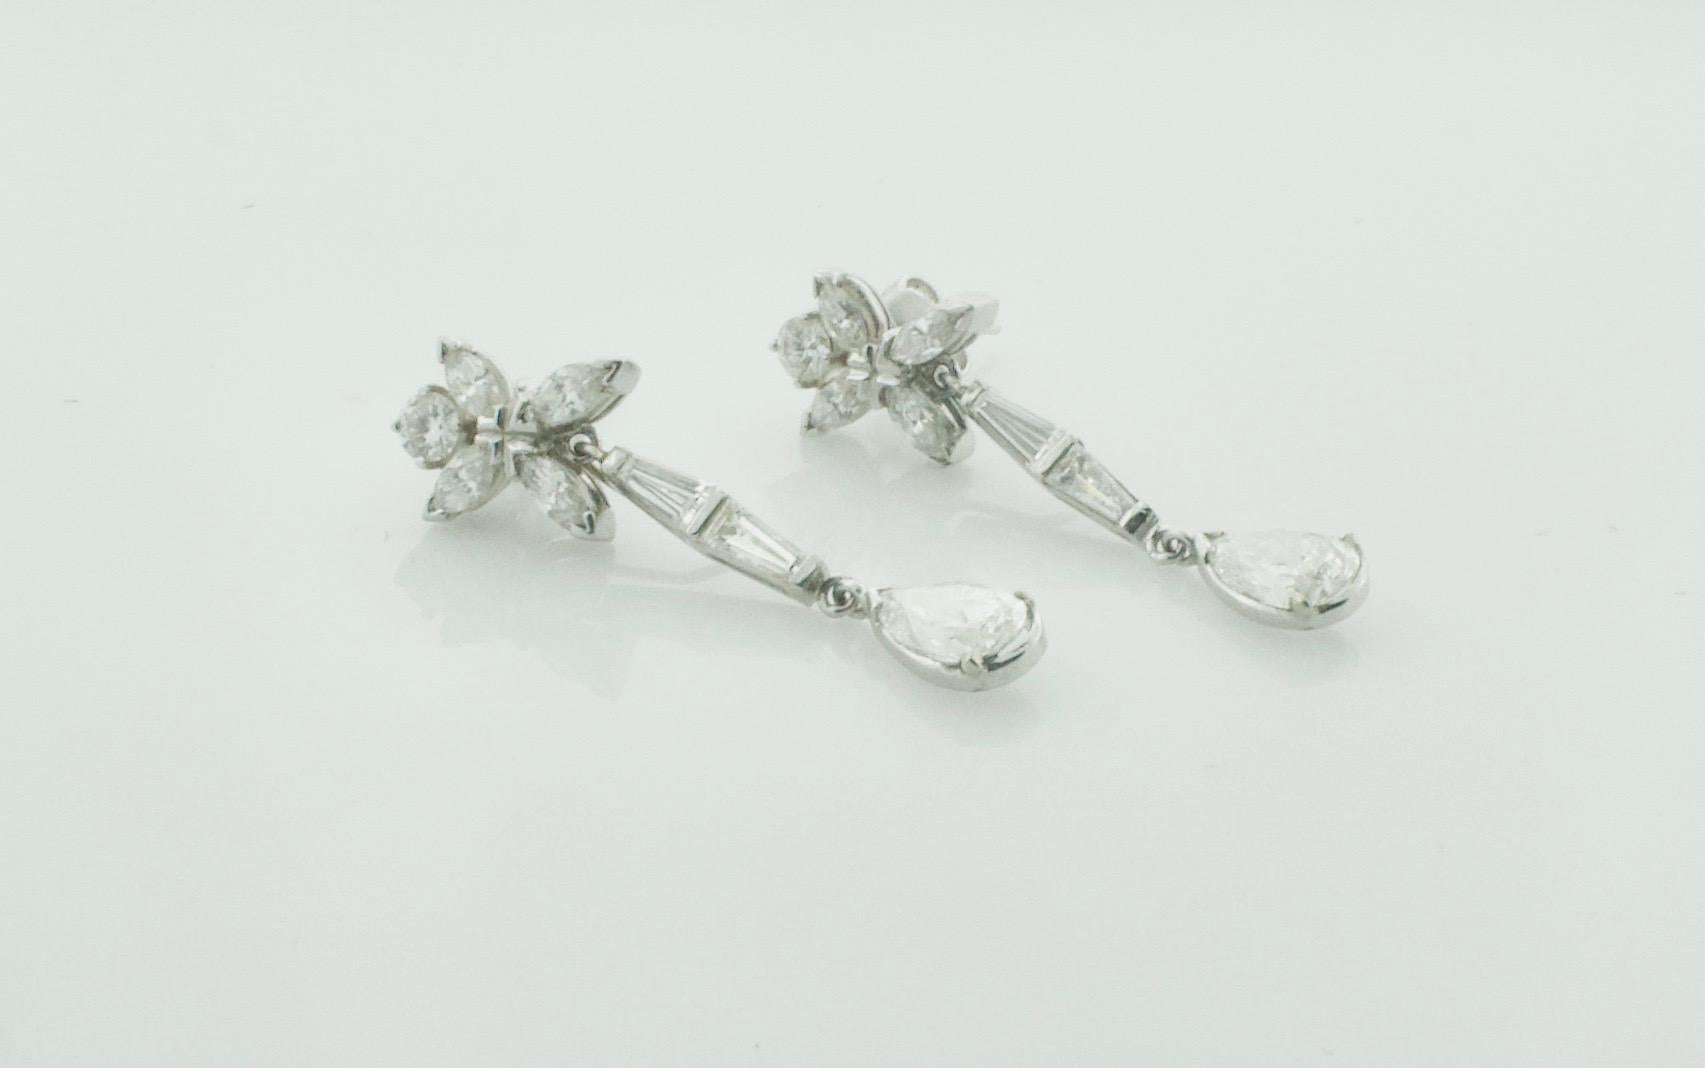 Diamond Pear Shape Drop Earrings in Platinum Circa 1950's
A Must Have For Your or Your's Jewelry Collection
Dangling and Articulated Throughout
2 Pear Shape Cut Diamonds Weighing 2.05 Carats [GIA Certified]
 14 Round Brilliant, Tapered Baguette and